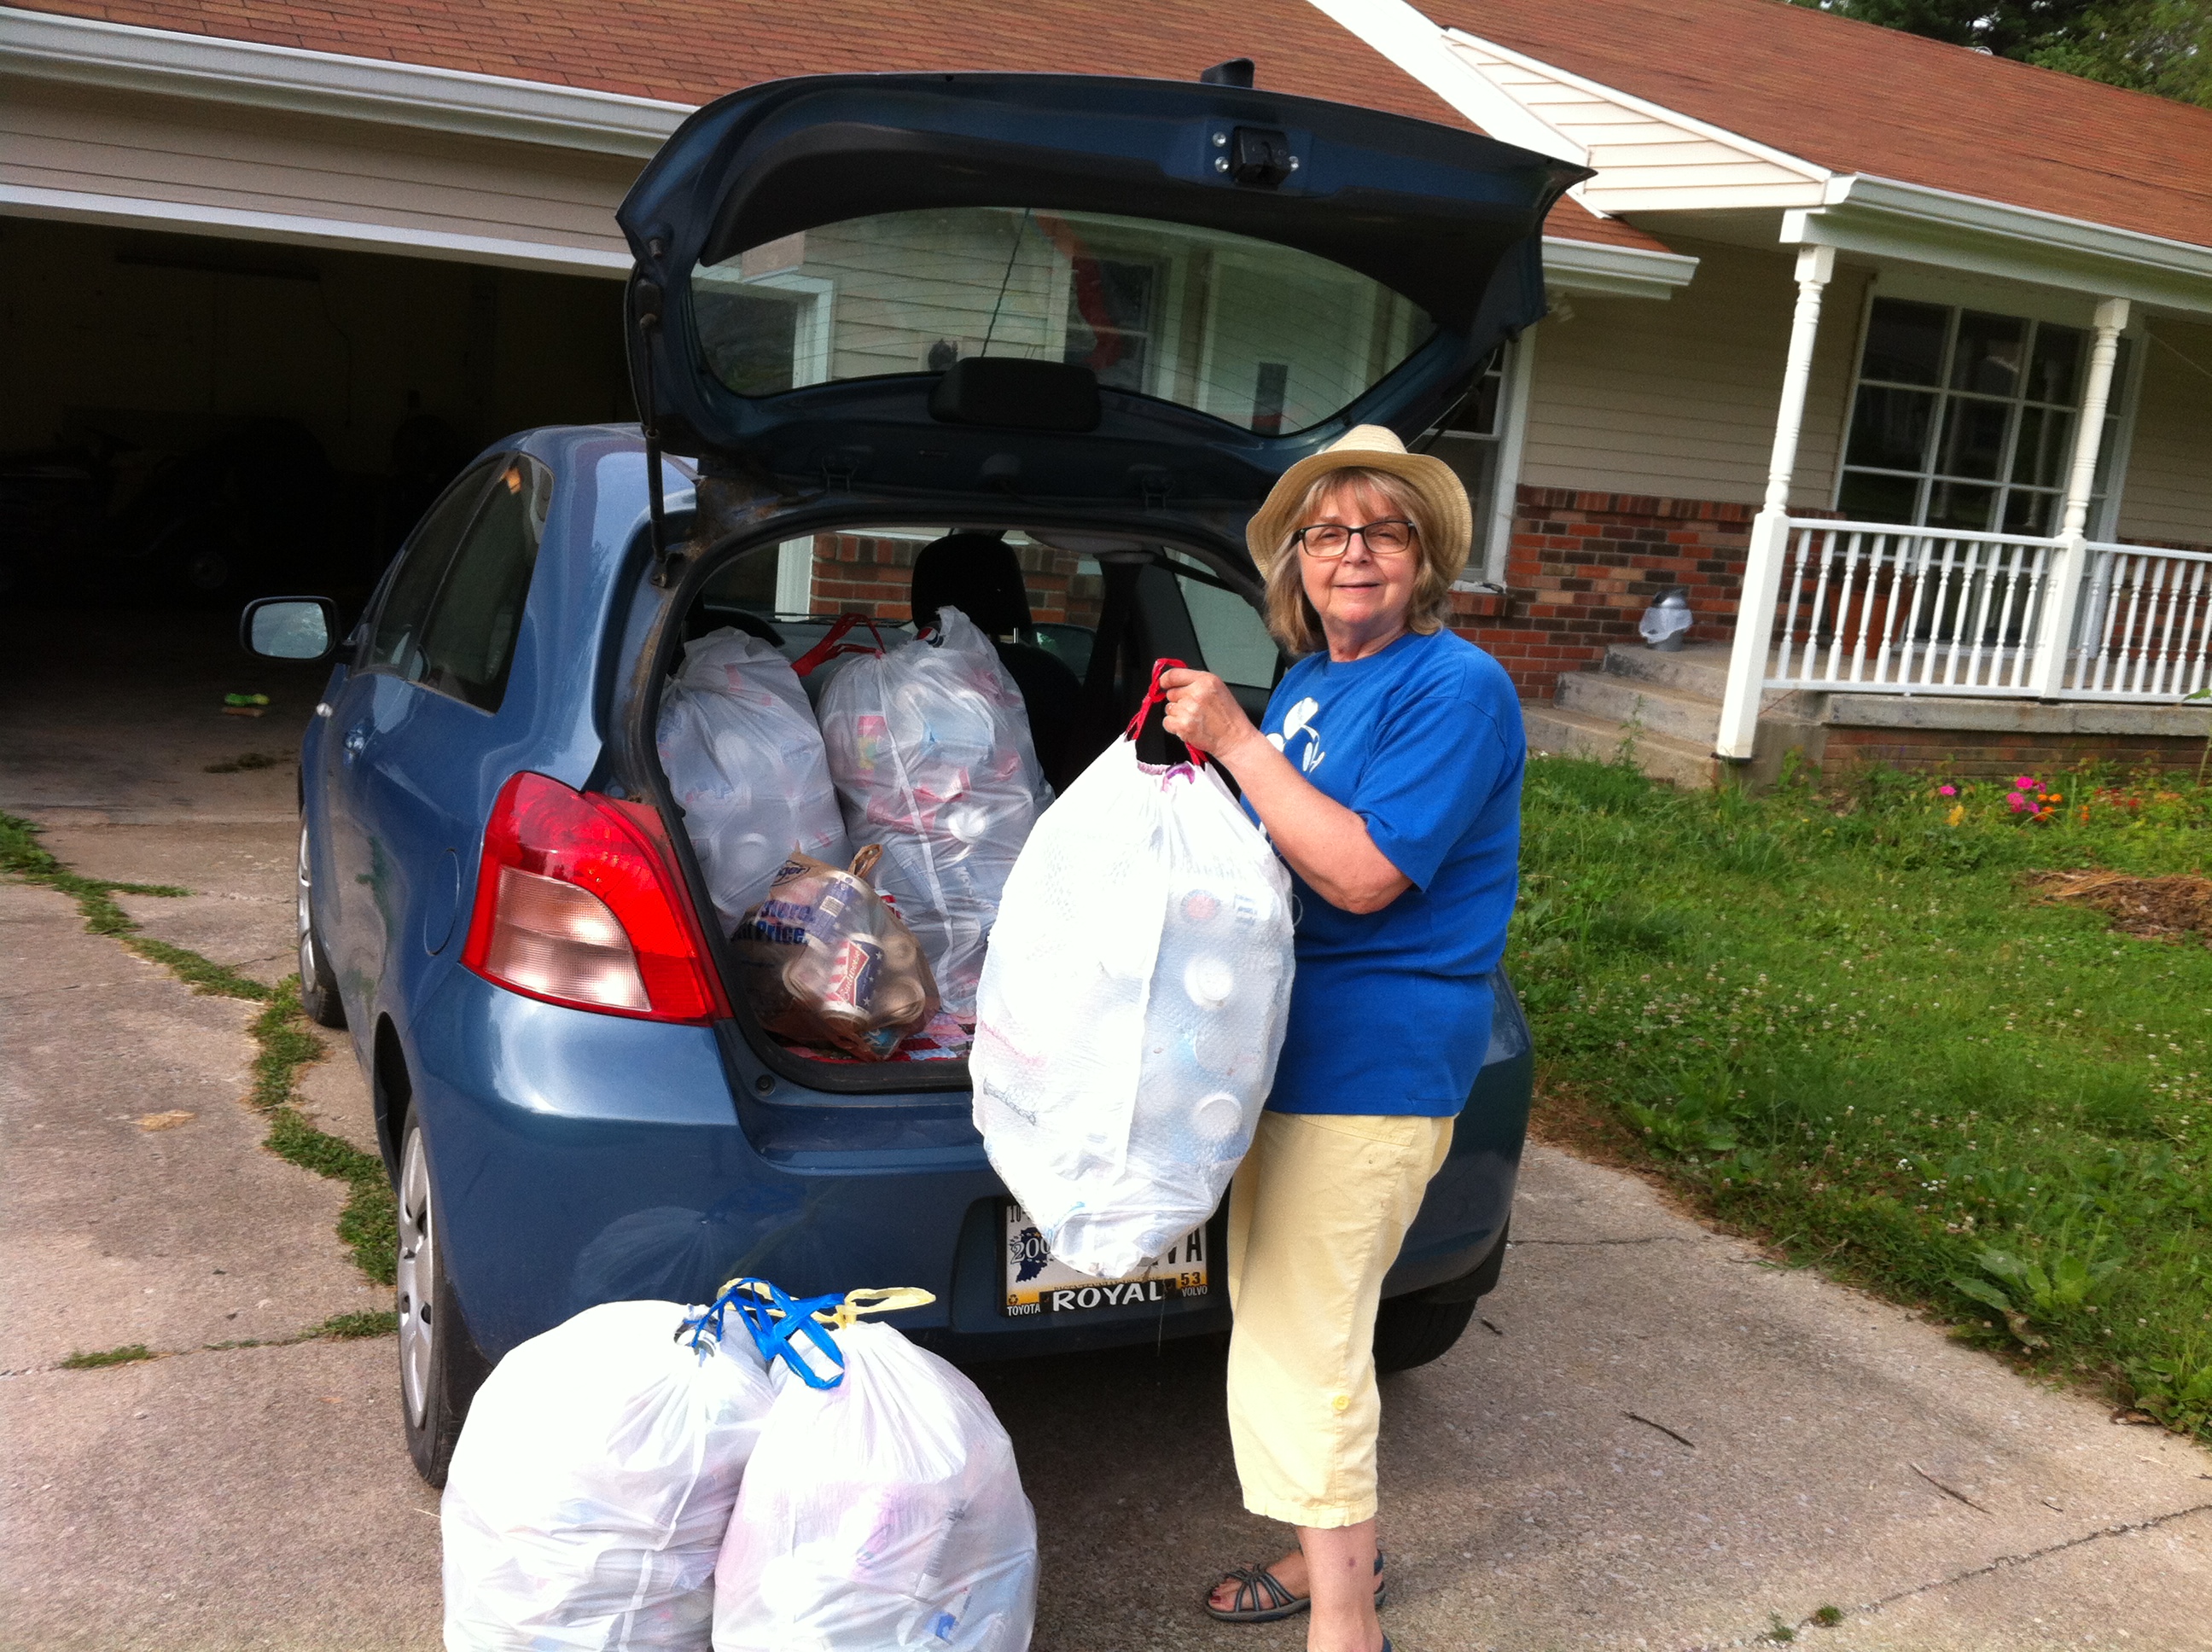 Georgia collects Rebekka's bags to add to her own for the Uncanny Project's first trip to recycling center, July 12, 2014. Mark the day!